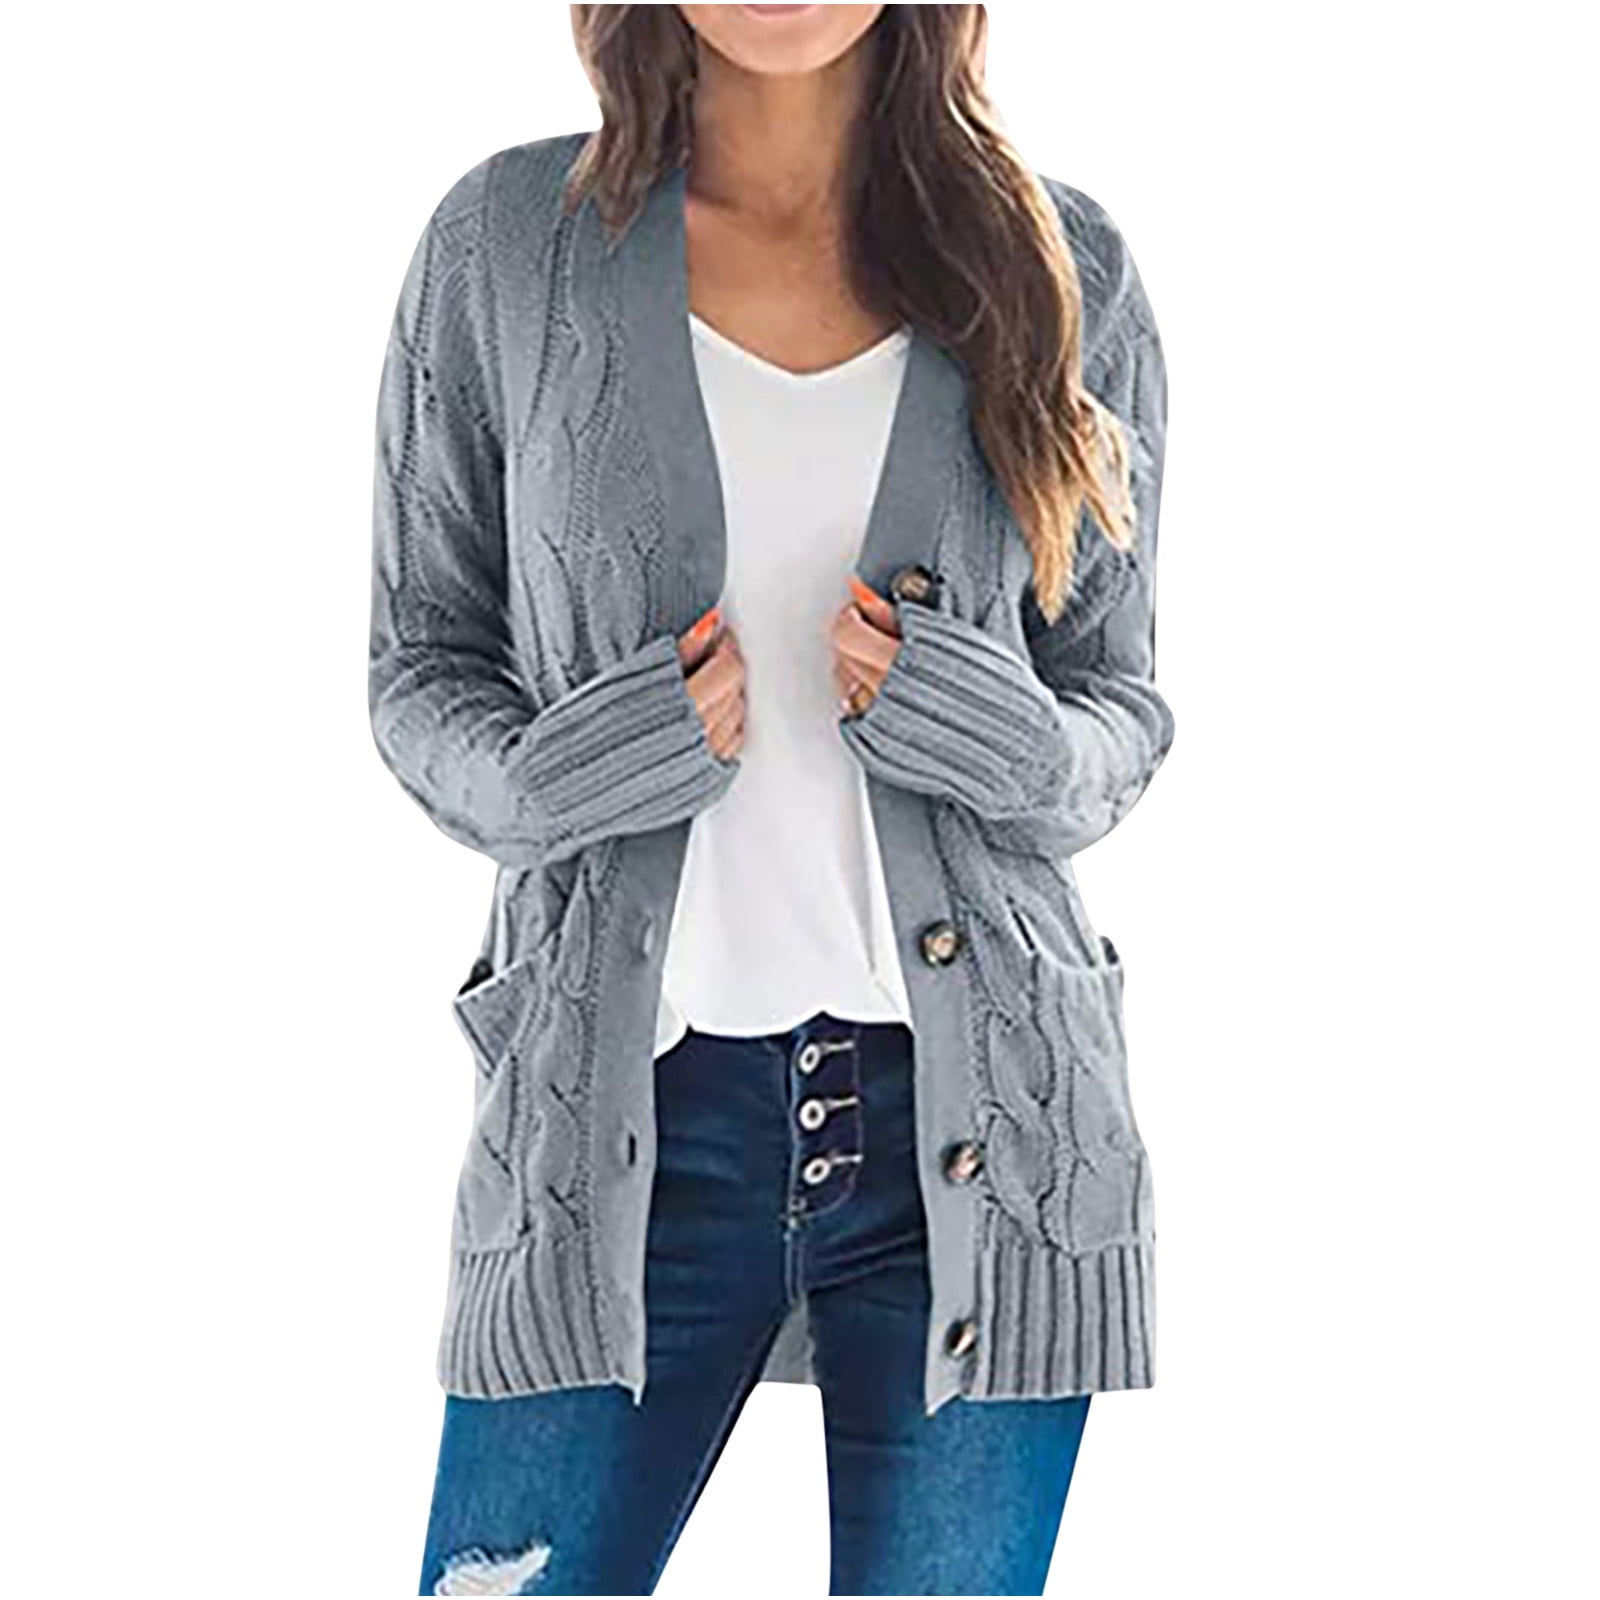 SMihono Clearance Single Breasted Women Tops Solid Knit Sweater Cardigan  Loose Slouchy V Neck Casual Wrap Chunky Loose Pocket Ladies Fashion Short